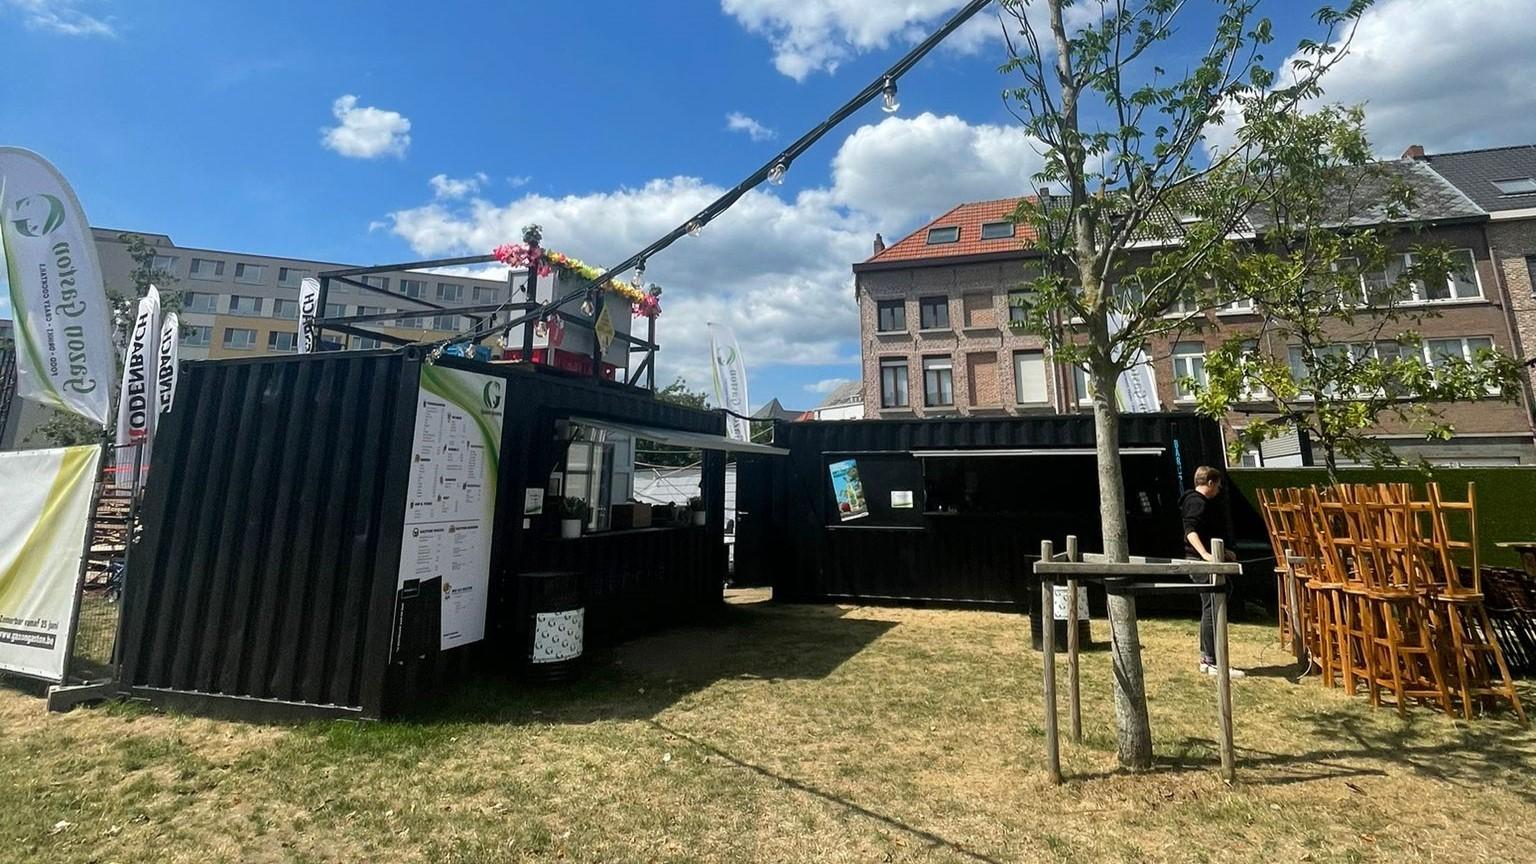 Two Pop up single hatch black 20 foot bar container on grass with custom lights for summer drinks in Mechelen. Available for sale or rent at ContainerID